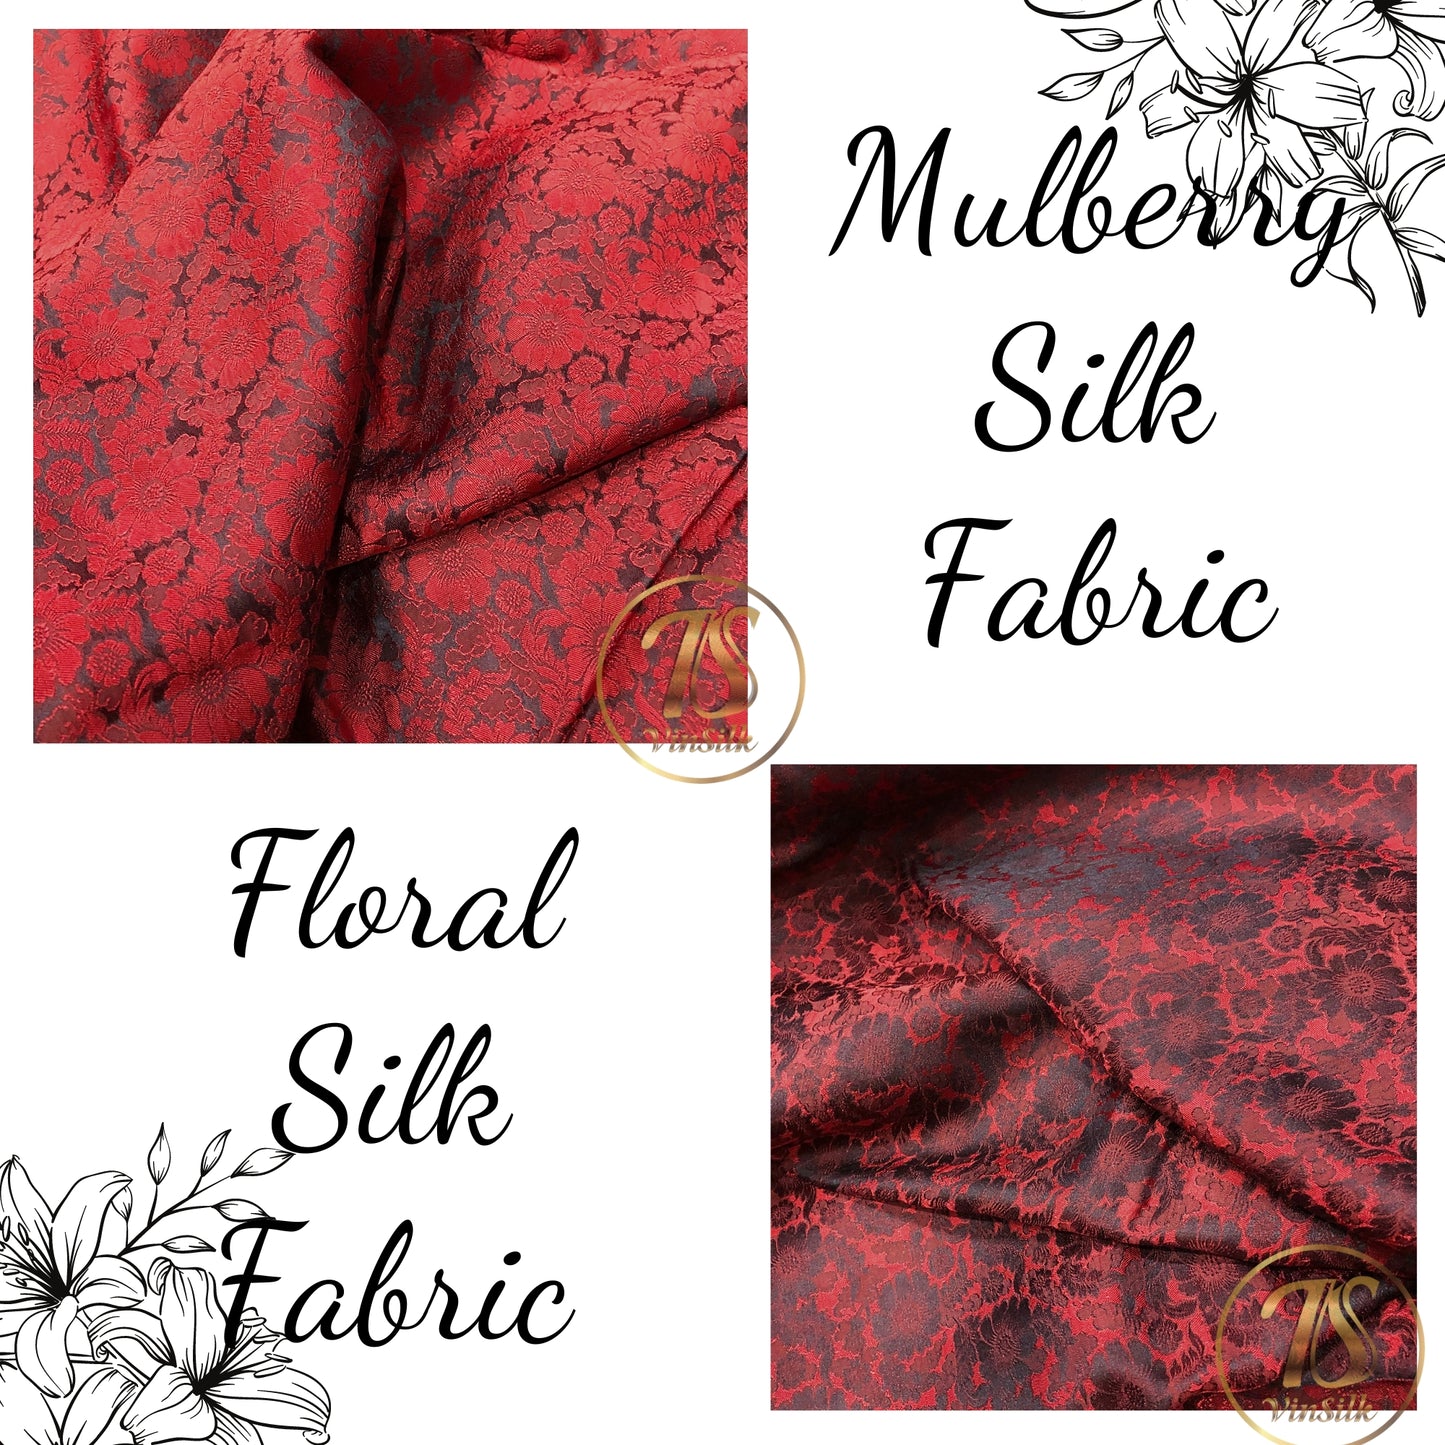 Mulberry Silk Floral Fabric – Chrysanthemum Pattern – Silk for Sewing